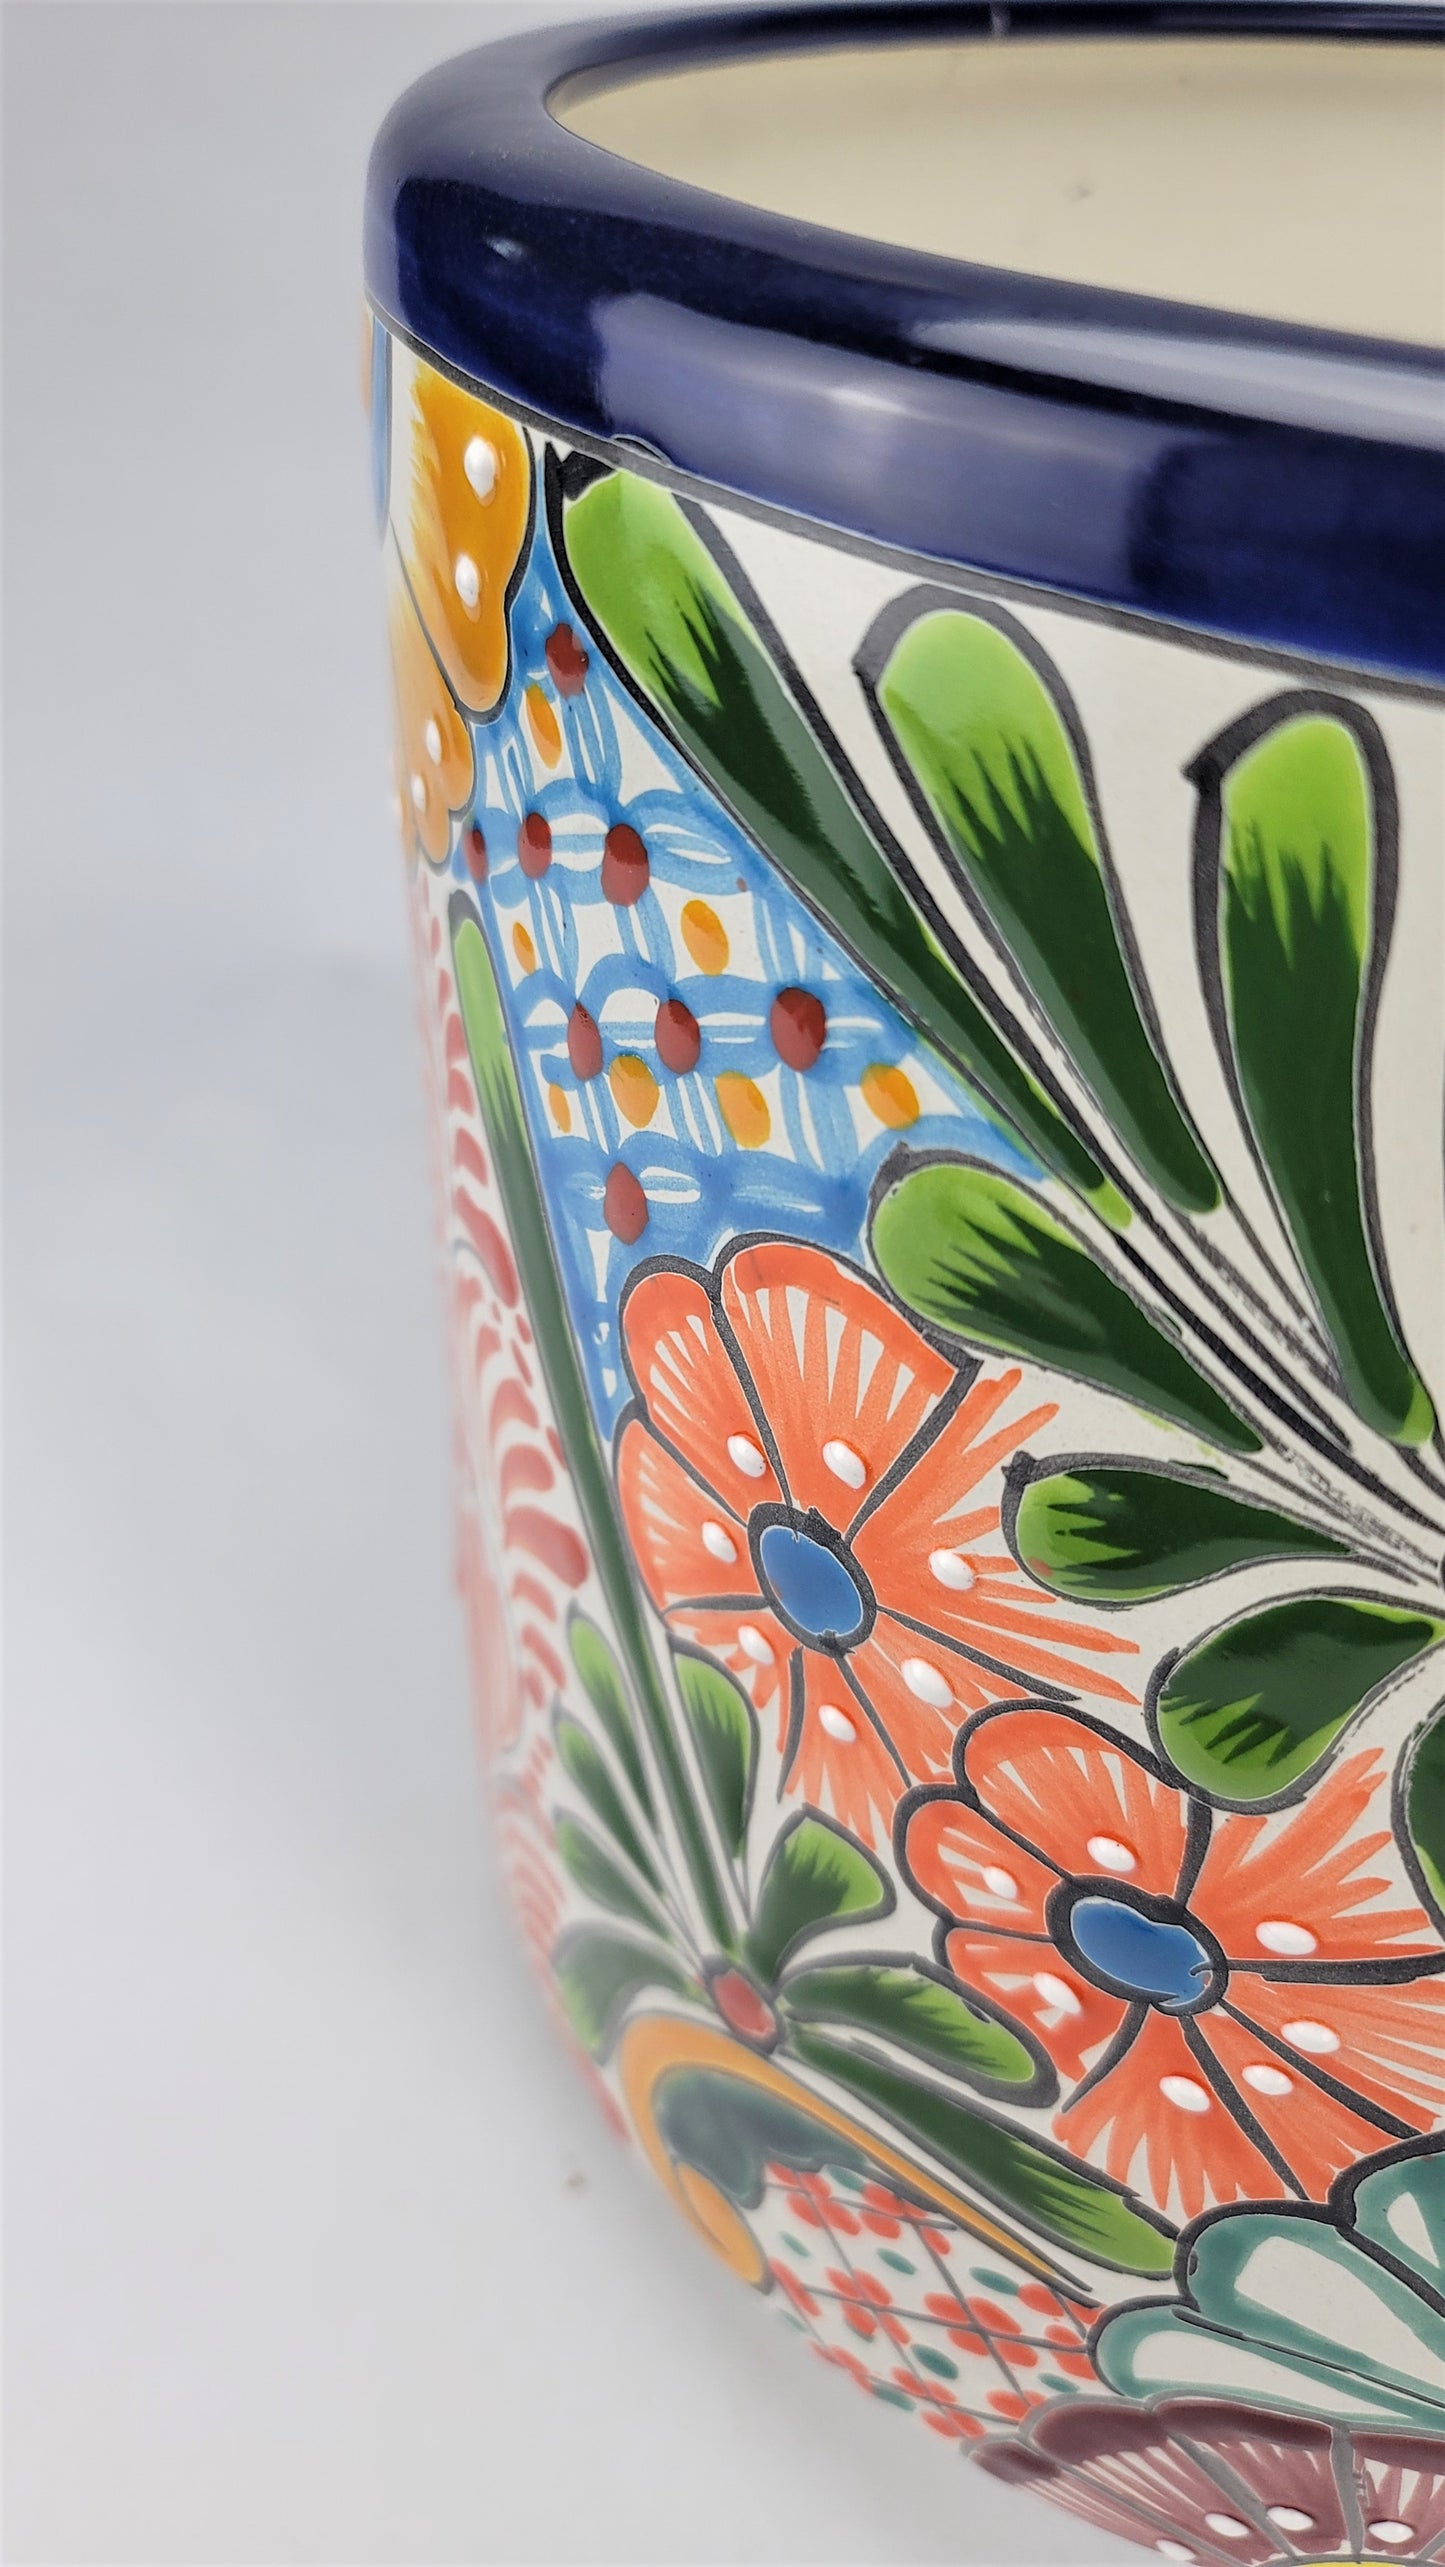 Mexican Pottery Hand-Crafted Floral Design Planter